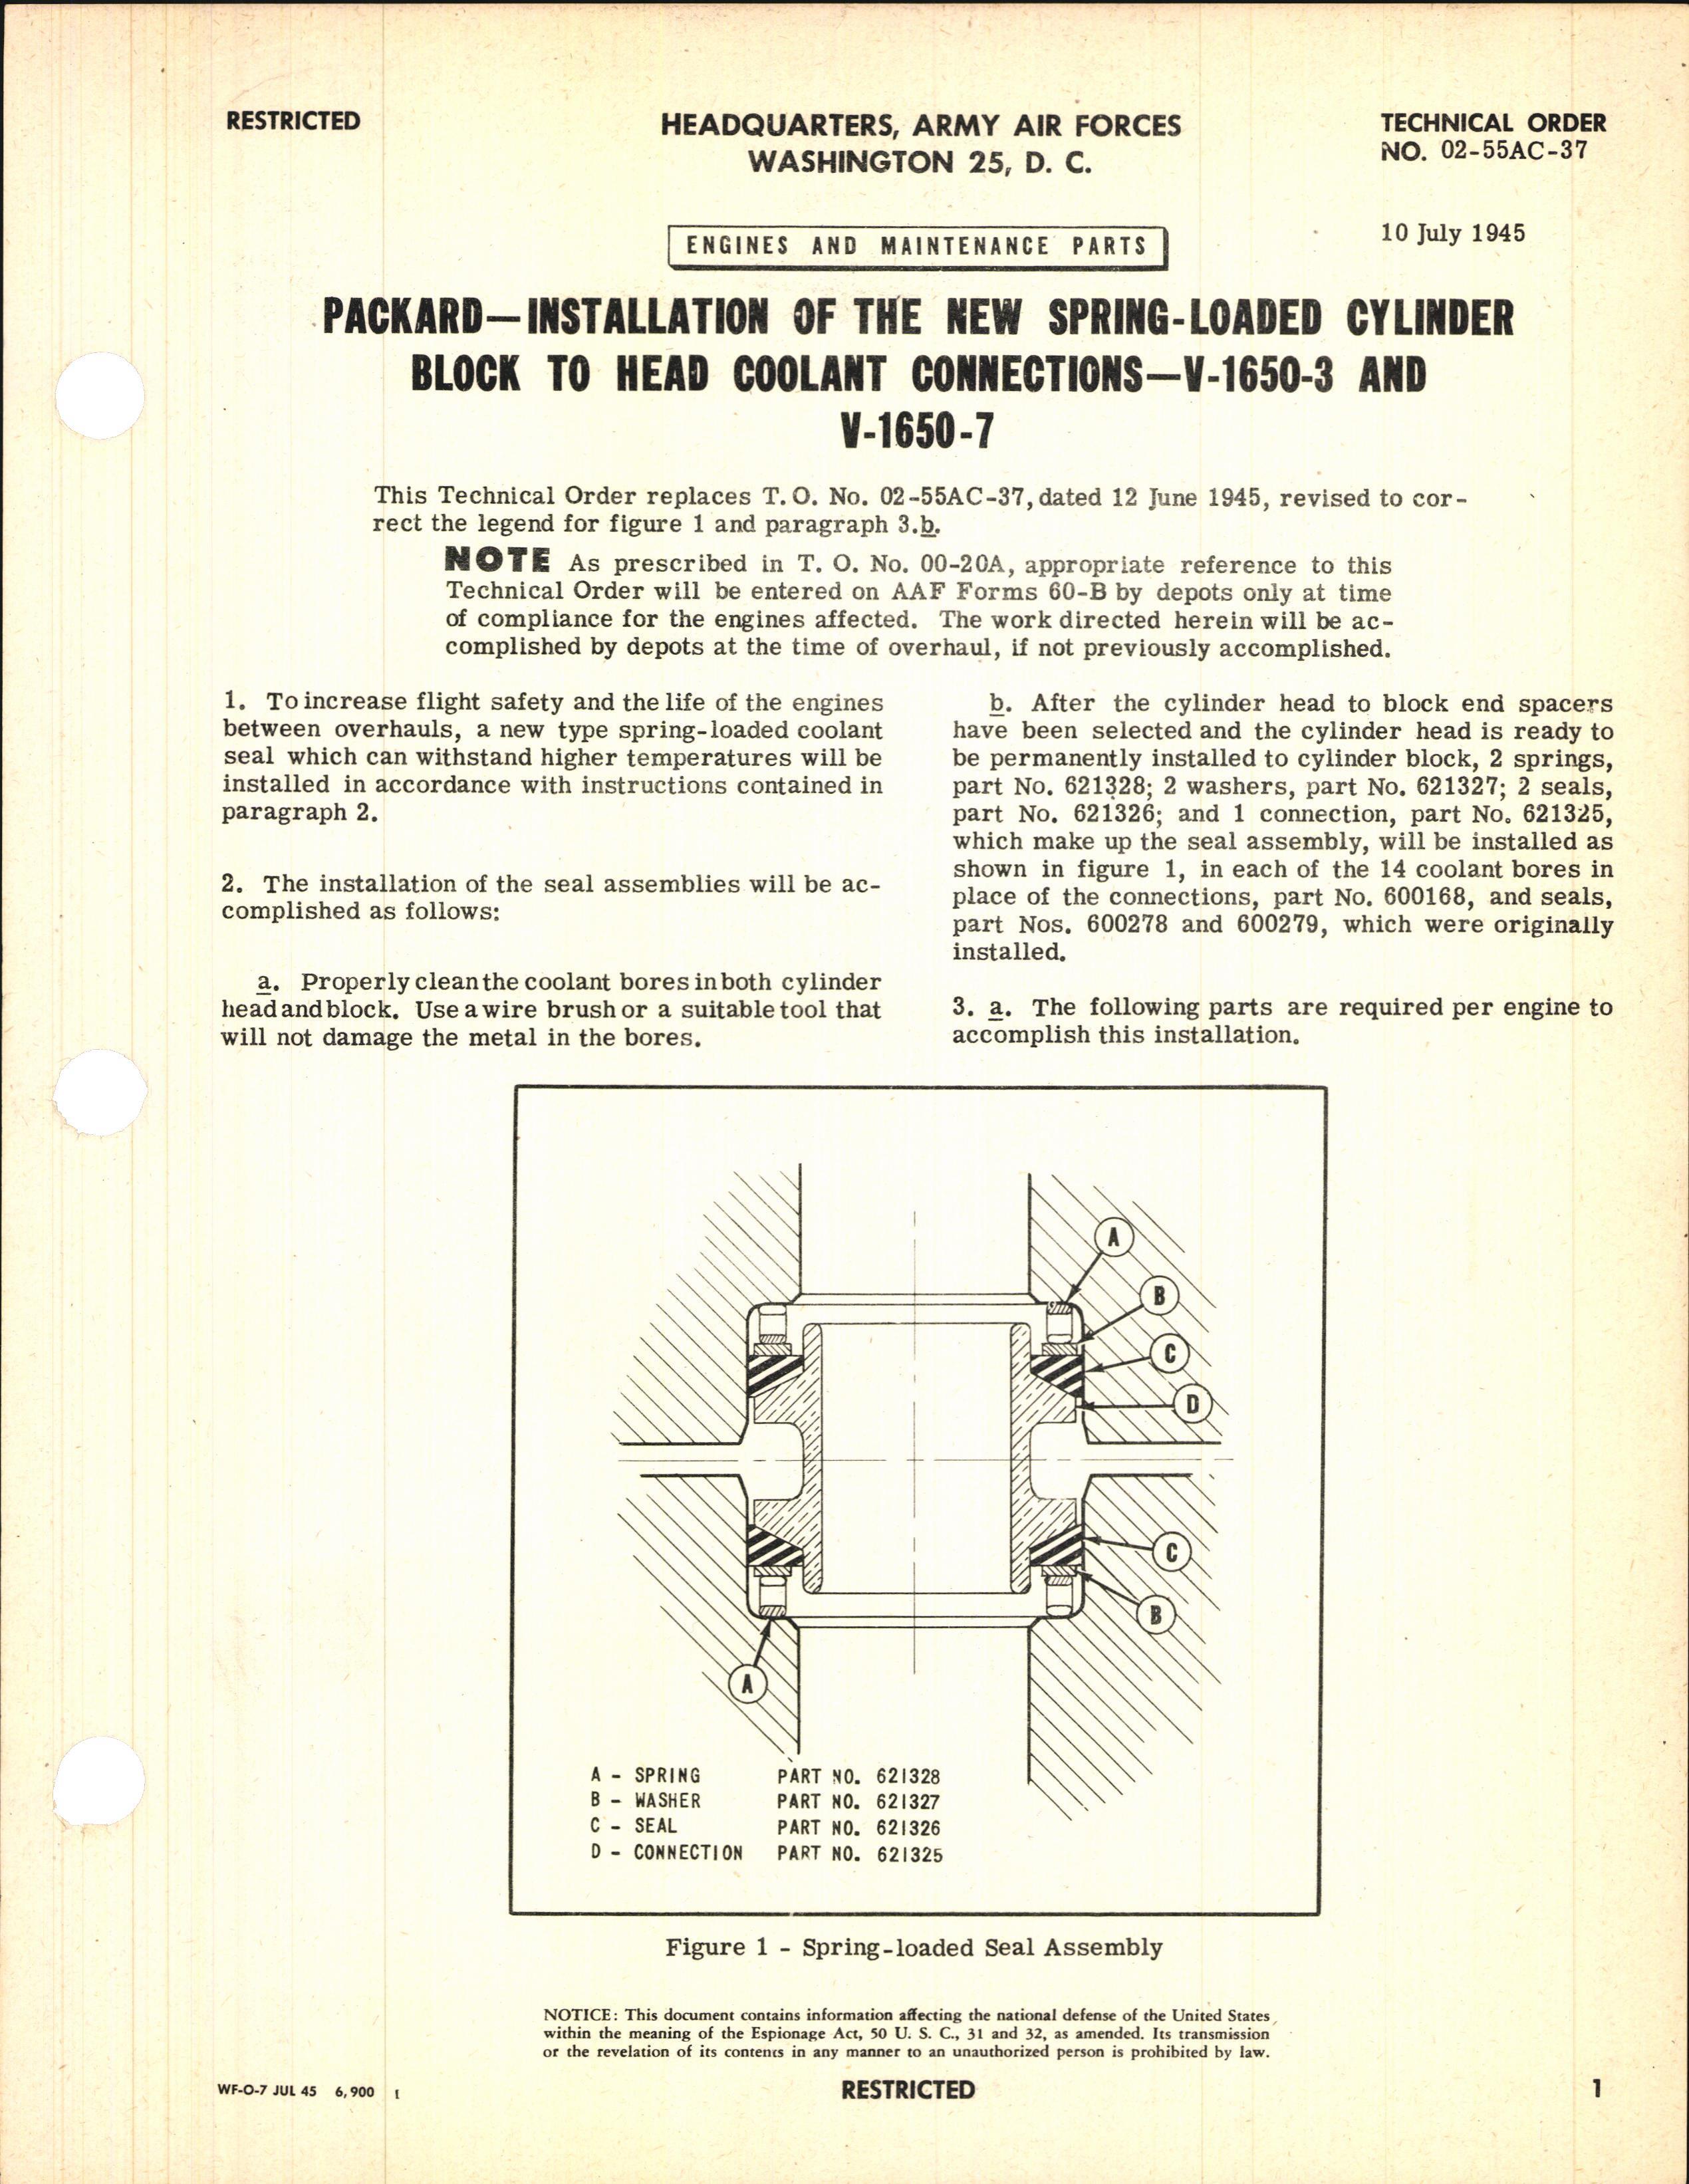 Sample page 1 from AirCorps Library document: Installation of the New Spring-Loaded Cylinder Block to Head Coolant Connections for V-1650-3 and -7